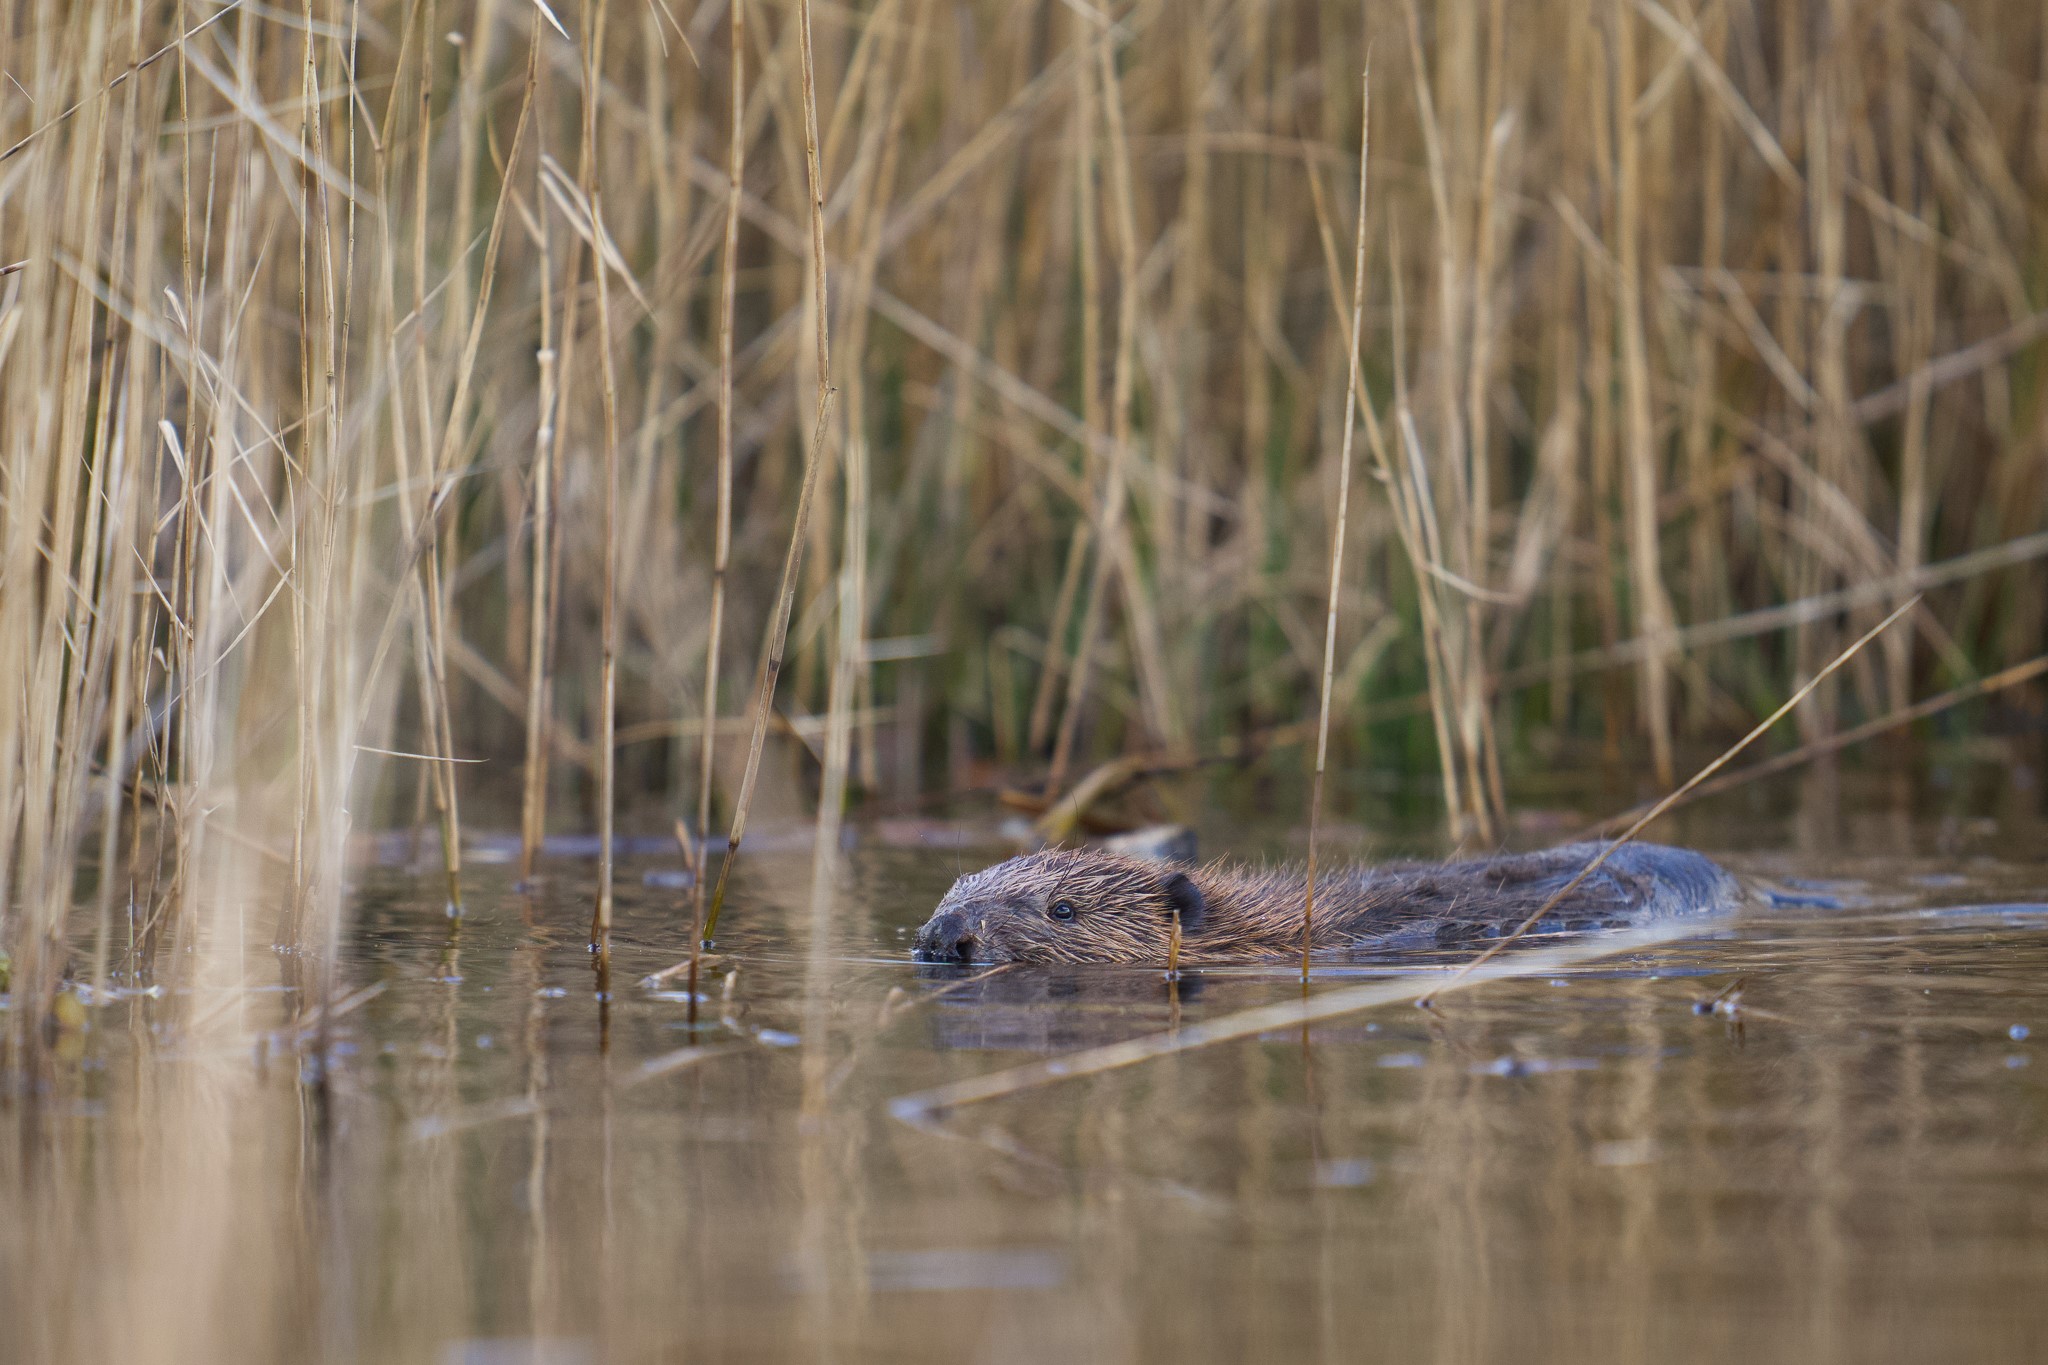 One of the beavers in the water